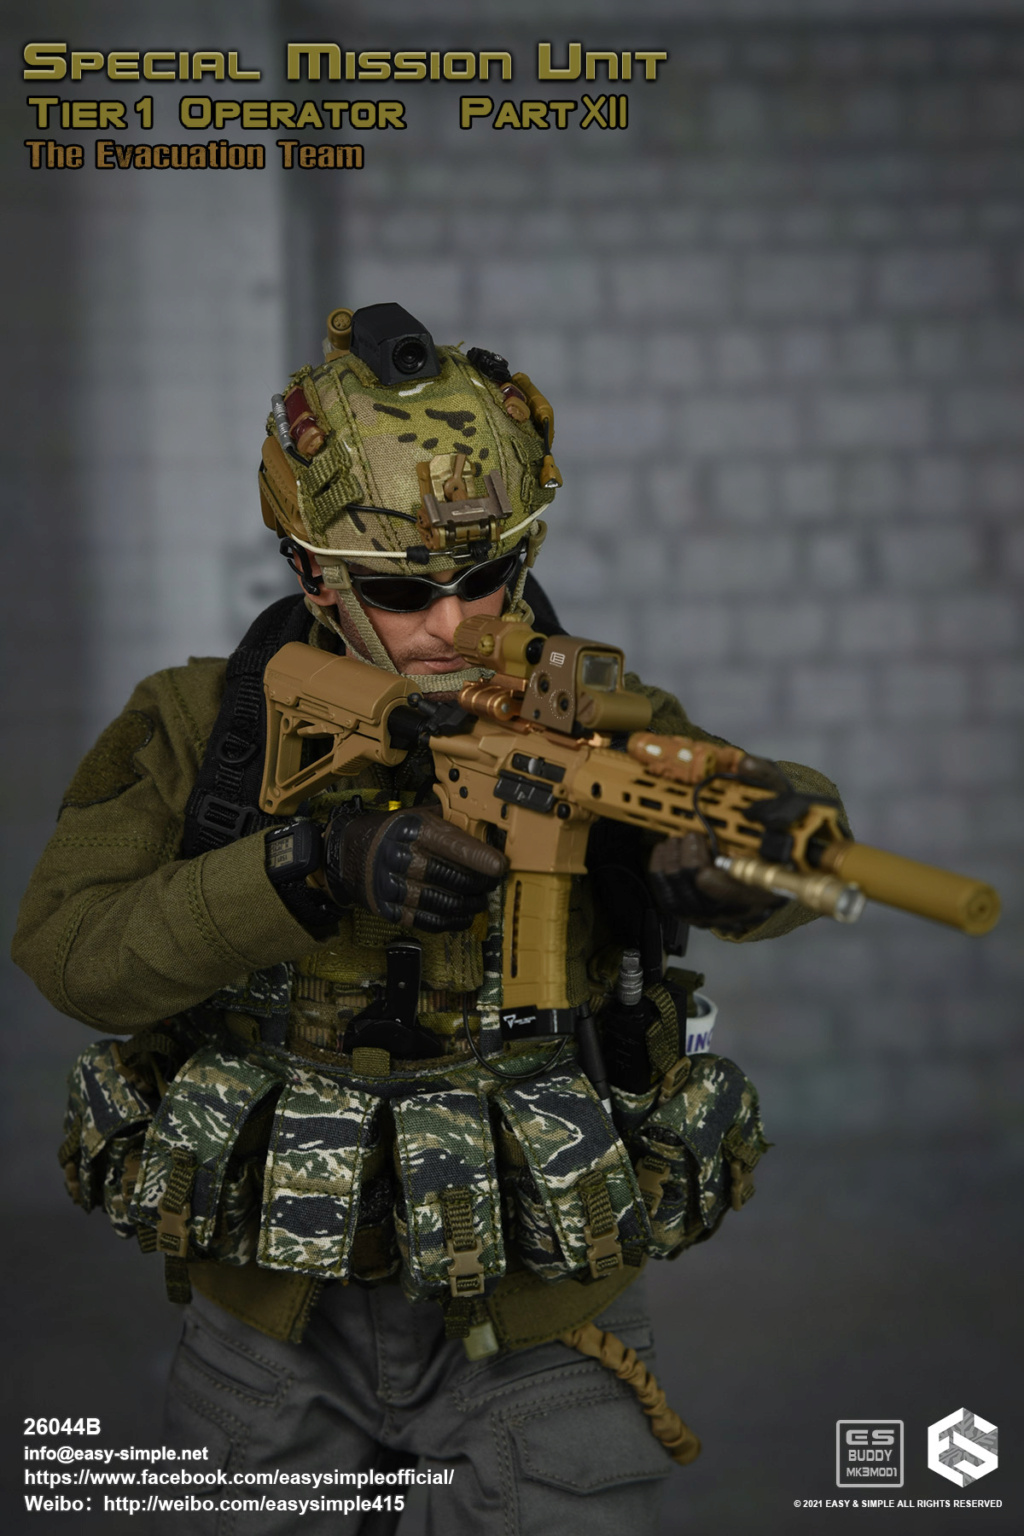 EvacuationTeam - NEW PRODUCT: Easy&Simple: 26044B Special Mission Unit Tier1 Operator Part XII The Evacuation Team 4dac3d10